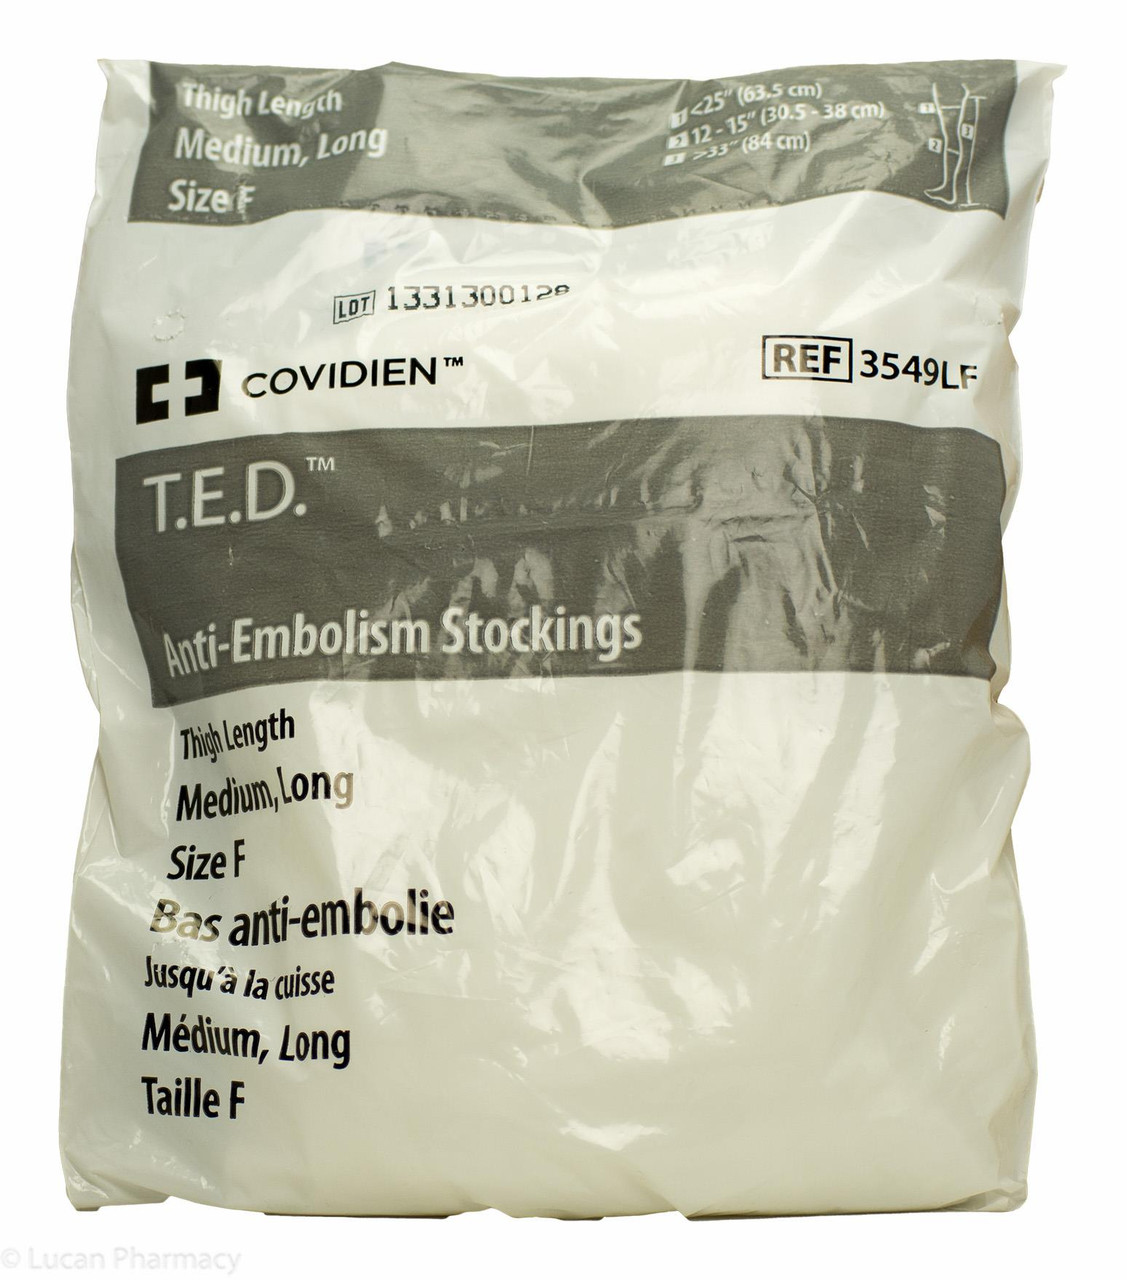 T.E.D.® AntiEmbolism Stockings TED Thigh Length Medium Long (Size F